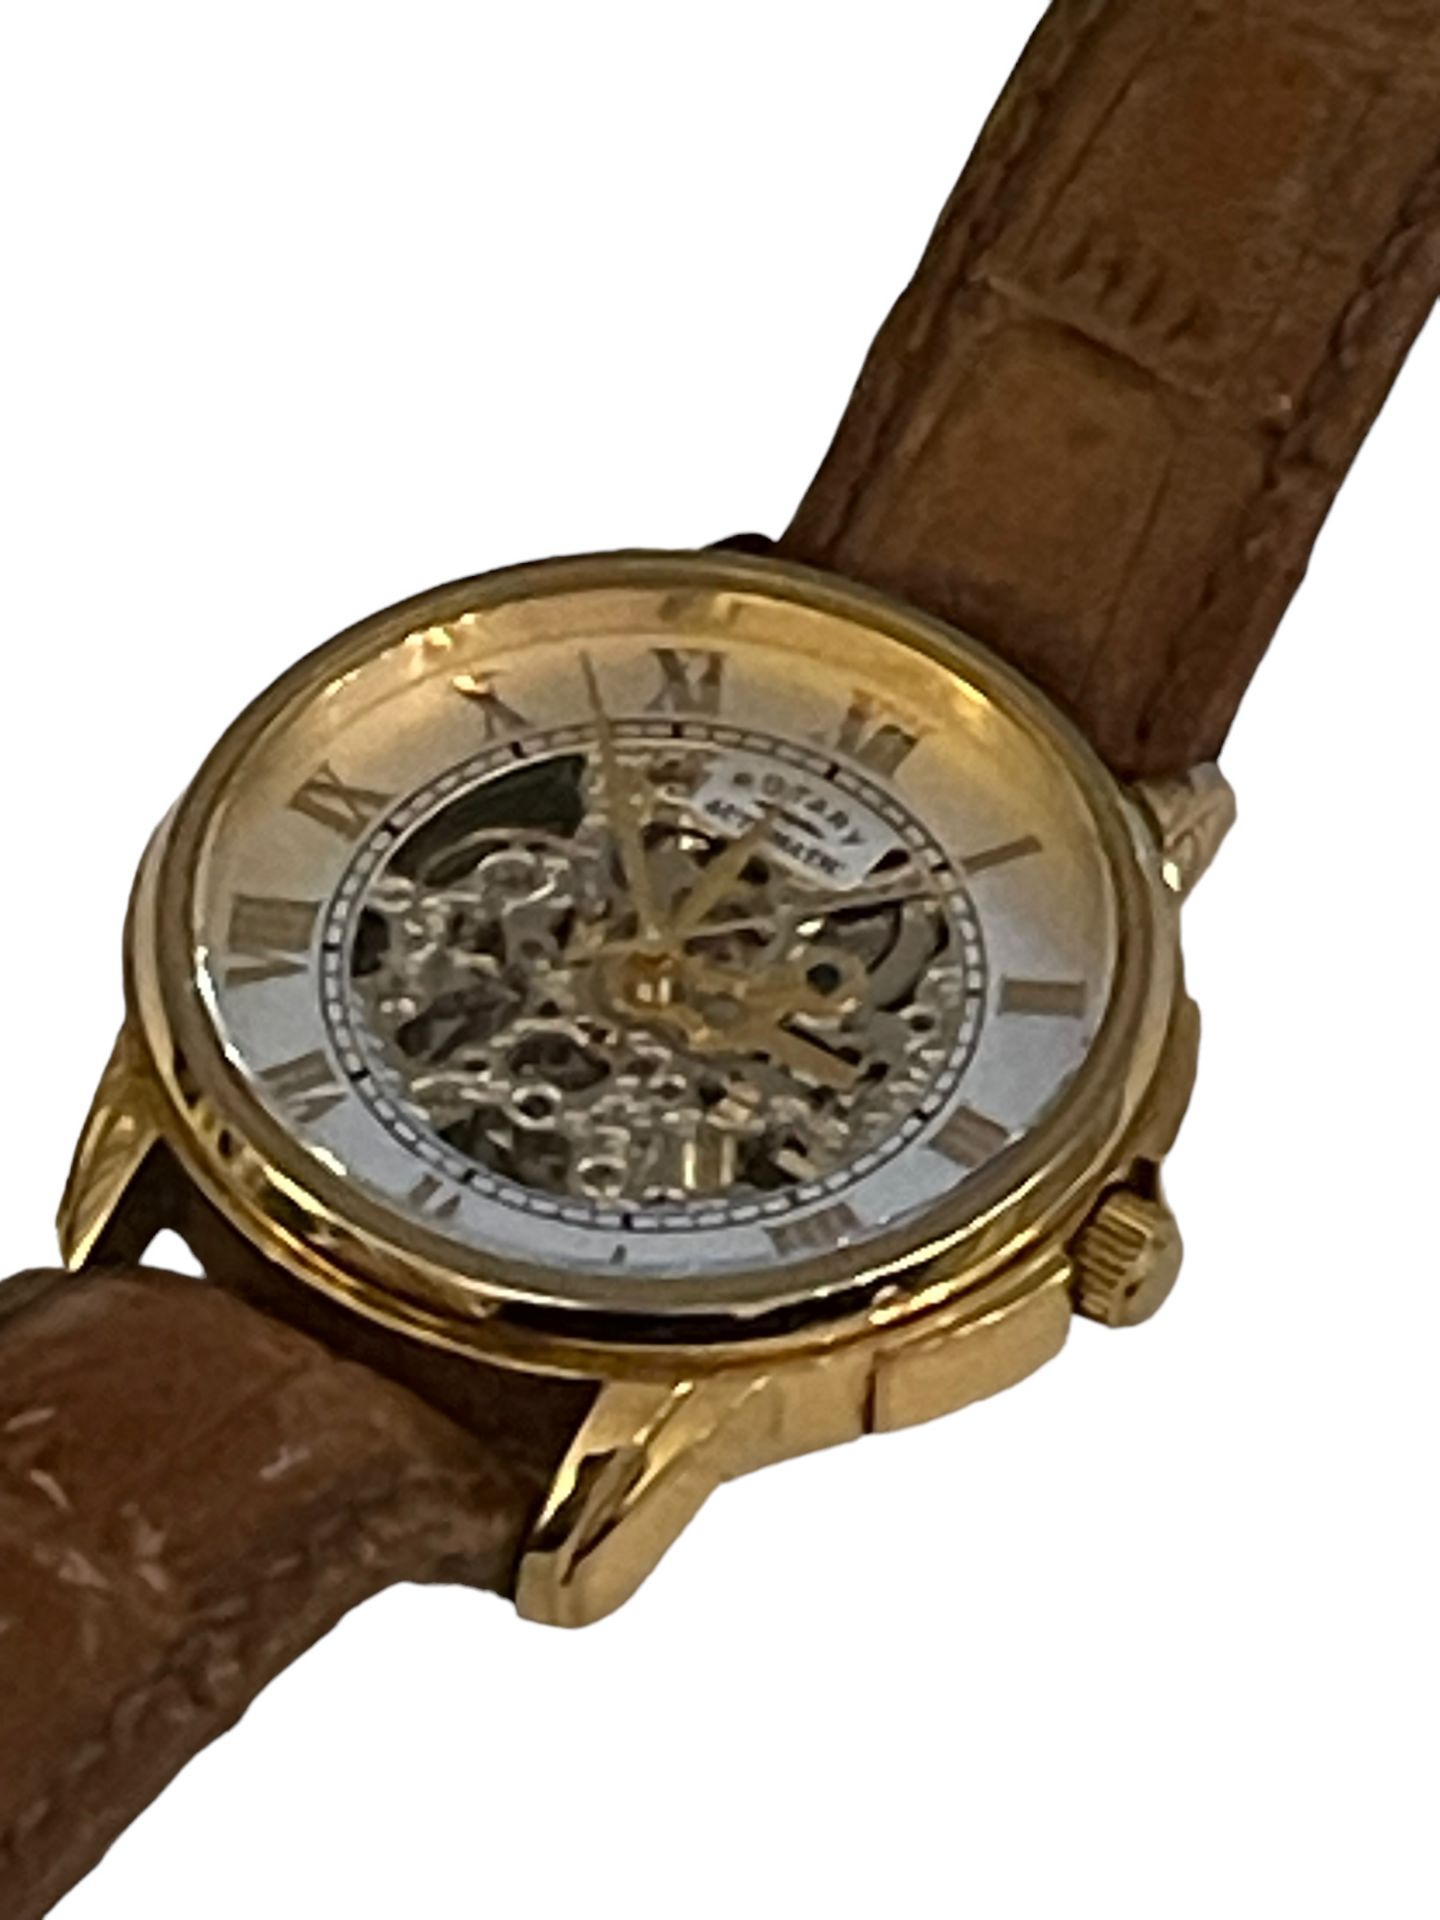 rotary watches return repairs or spares from a private jet charter no reserve - Image 2 of 2